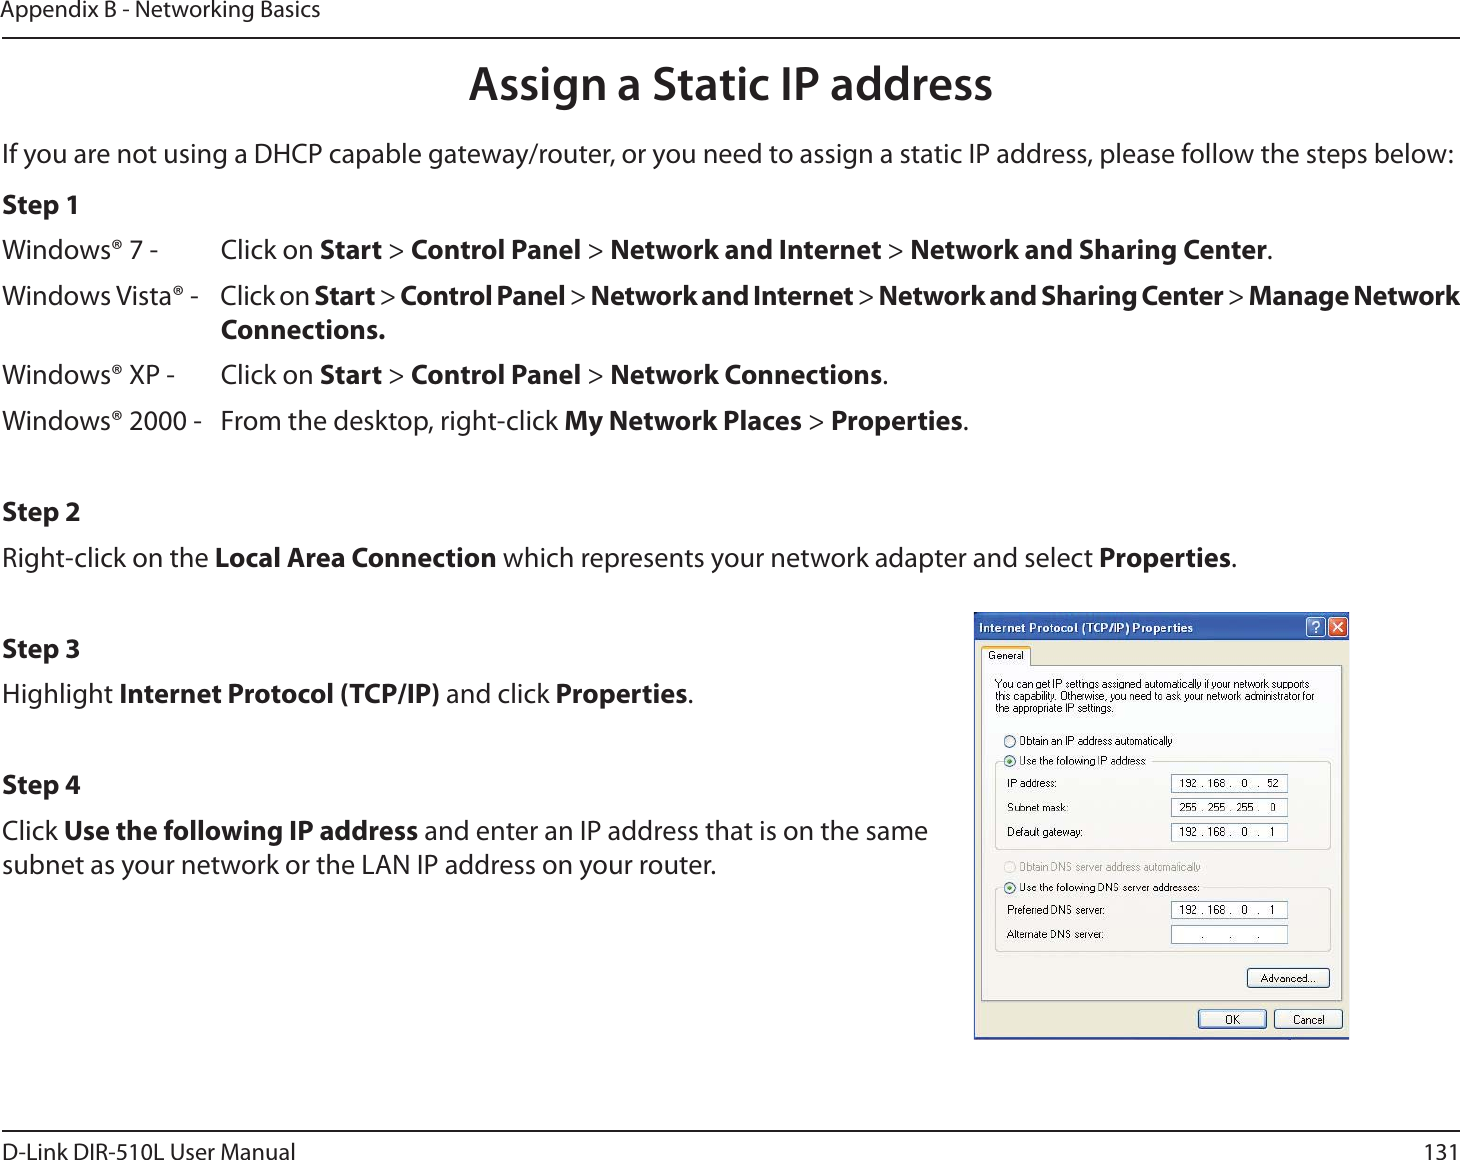 131D-Link DIR-510L User ManualAppendix B - Networking BasicsAssign a Static IP addressIf you are not using a DHCP capable gateway/router, or you need to assign a static IP address, please follow the steps below:Step 1Windows® 7 -  Click on Start &gt; Control Panel &gt; Network and Internet &gt; Network and Sharing Center.Windows Vista® -  Click on Start &gt; Control Panel &gt; Network and Internet &gt; Network and Sharing Center &gt; Manage Network    Connections.Windows® XP -  Click on Start &gt; Control Panel &gt; Network Connections.Windows® 2000 -  From the desktop, right-click My Network Places &gt; Properties.Step 2Right-click on the Local Area Connection which represents your network adapter and select Properties.Step 3Highlight Internet Protocol (TCP/IP) and click Properties.Step 4Click Use the following IP address and enter an IP address that is on the same subnet as your network or the LAN IP address on your router. 